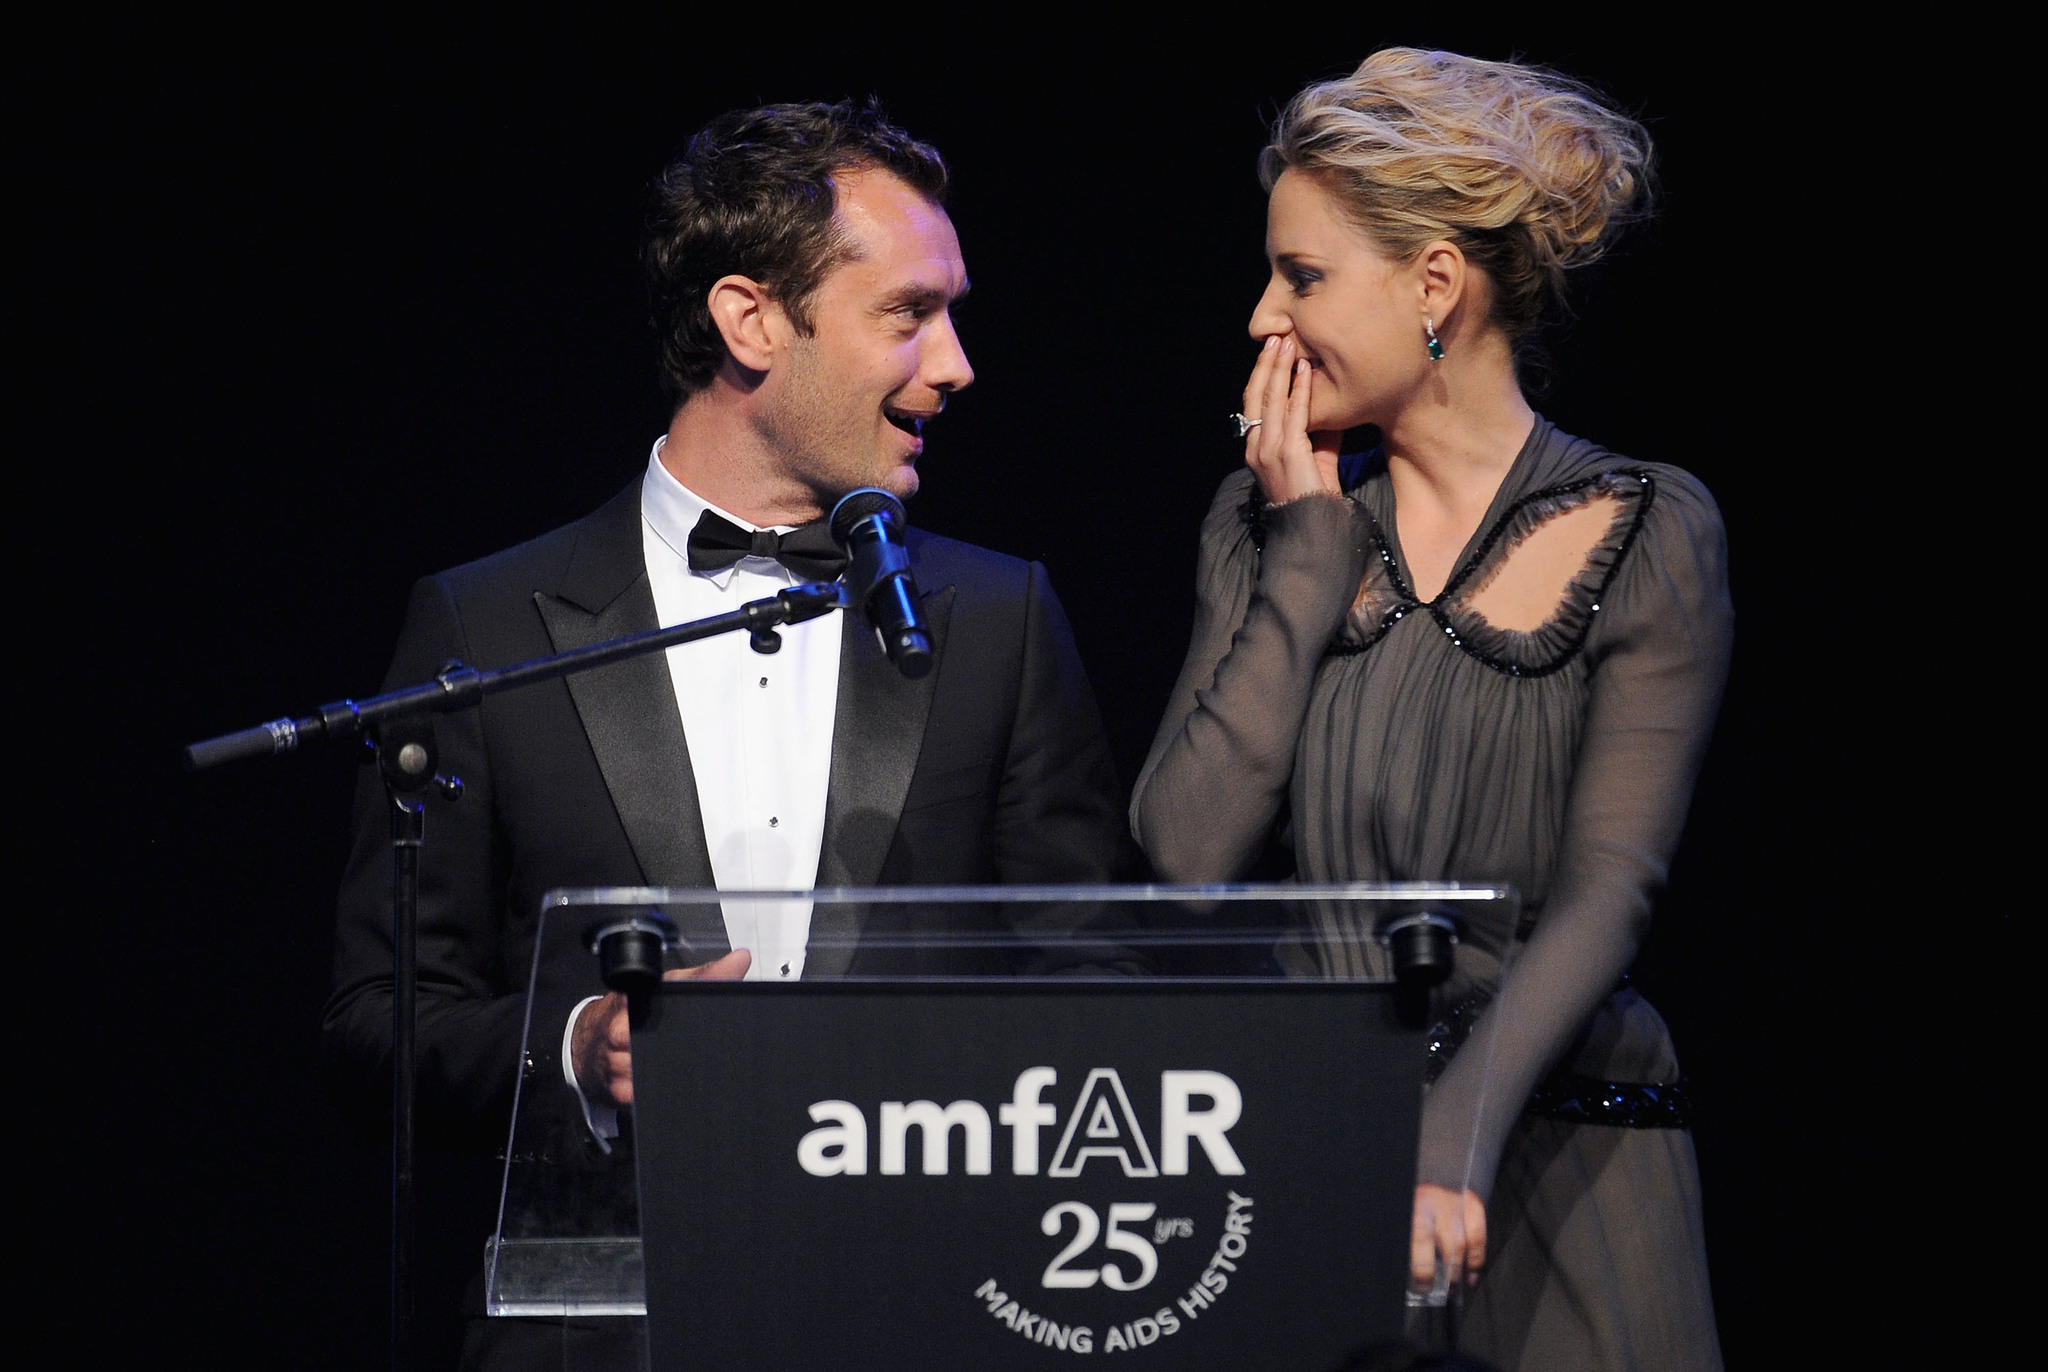 Jude Law and Aimee Mullins